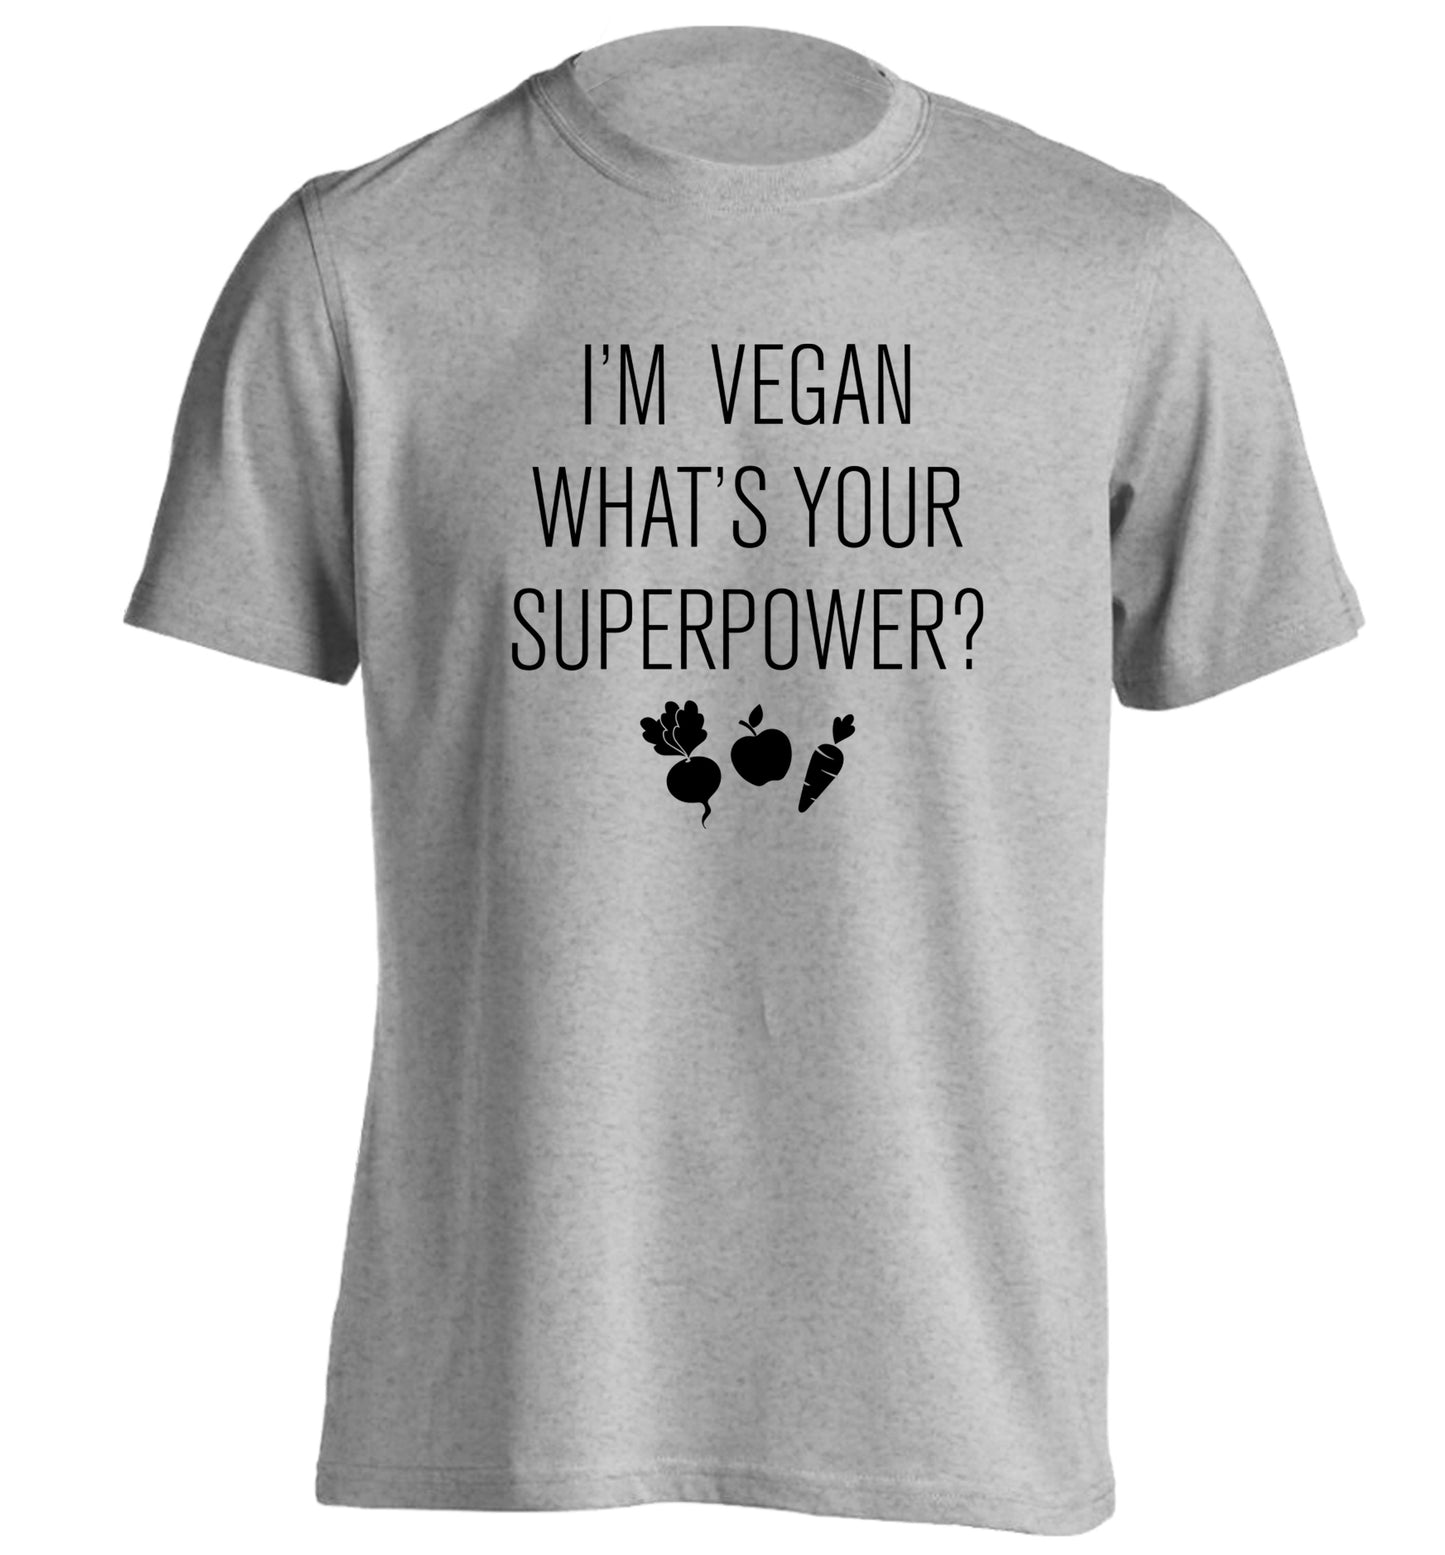 I'm Vegan What's Your Superpower? adults unisex grey Tshirt 2XL